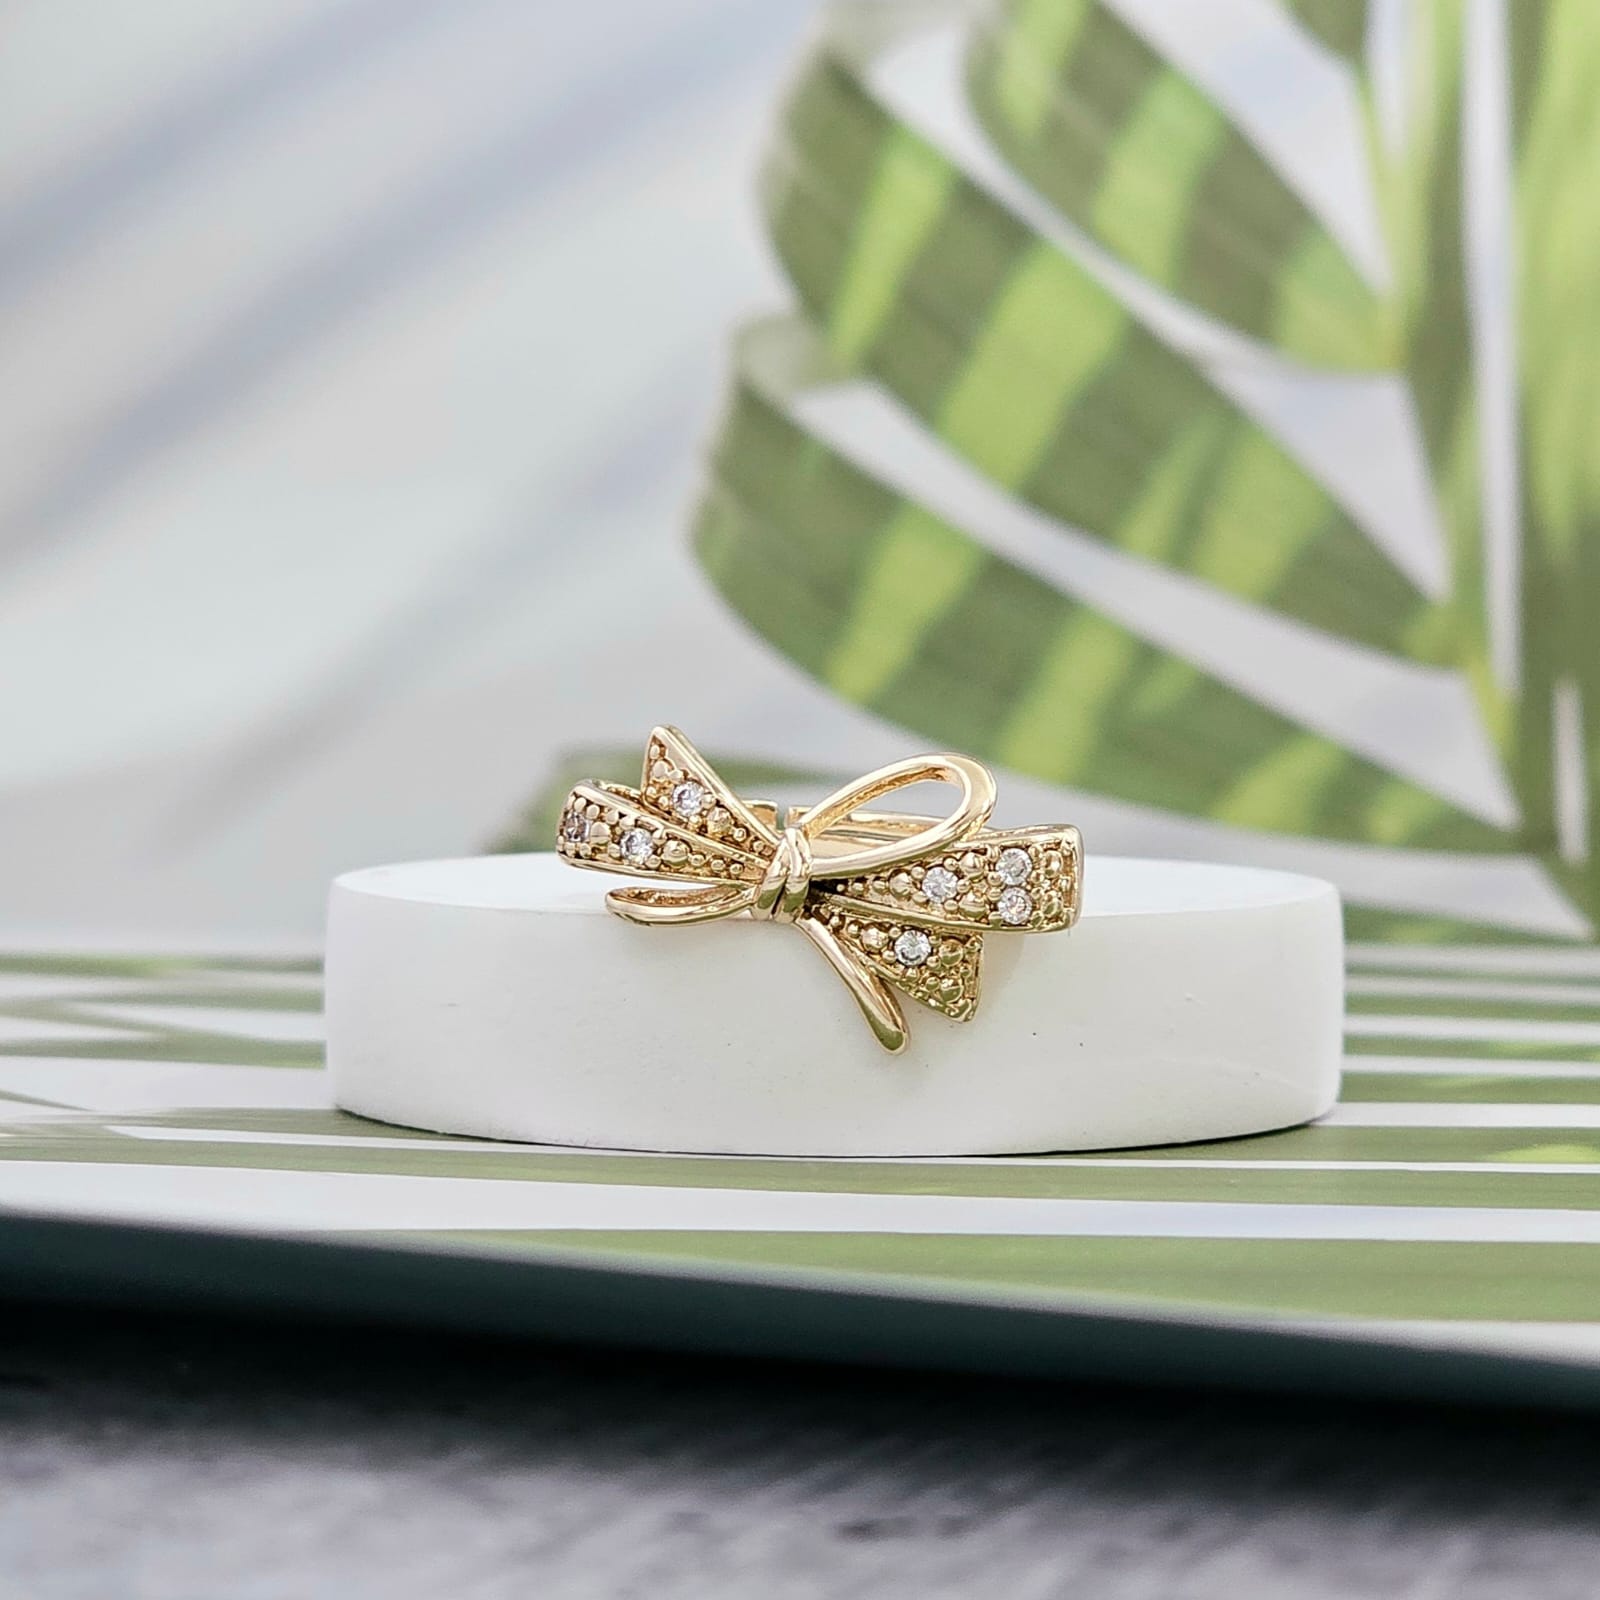 Saks Fifth Avenue 14K Yellow Gold Bow Ring on SALE | Saks OFF 5TH